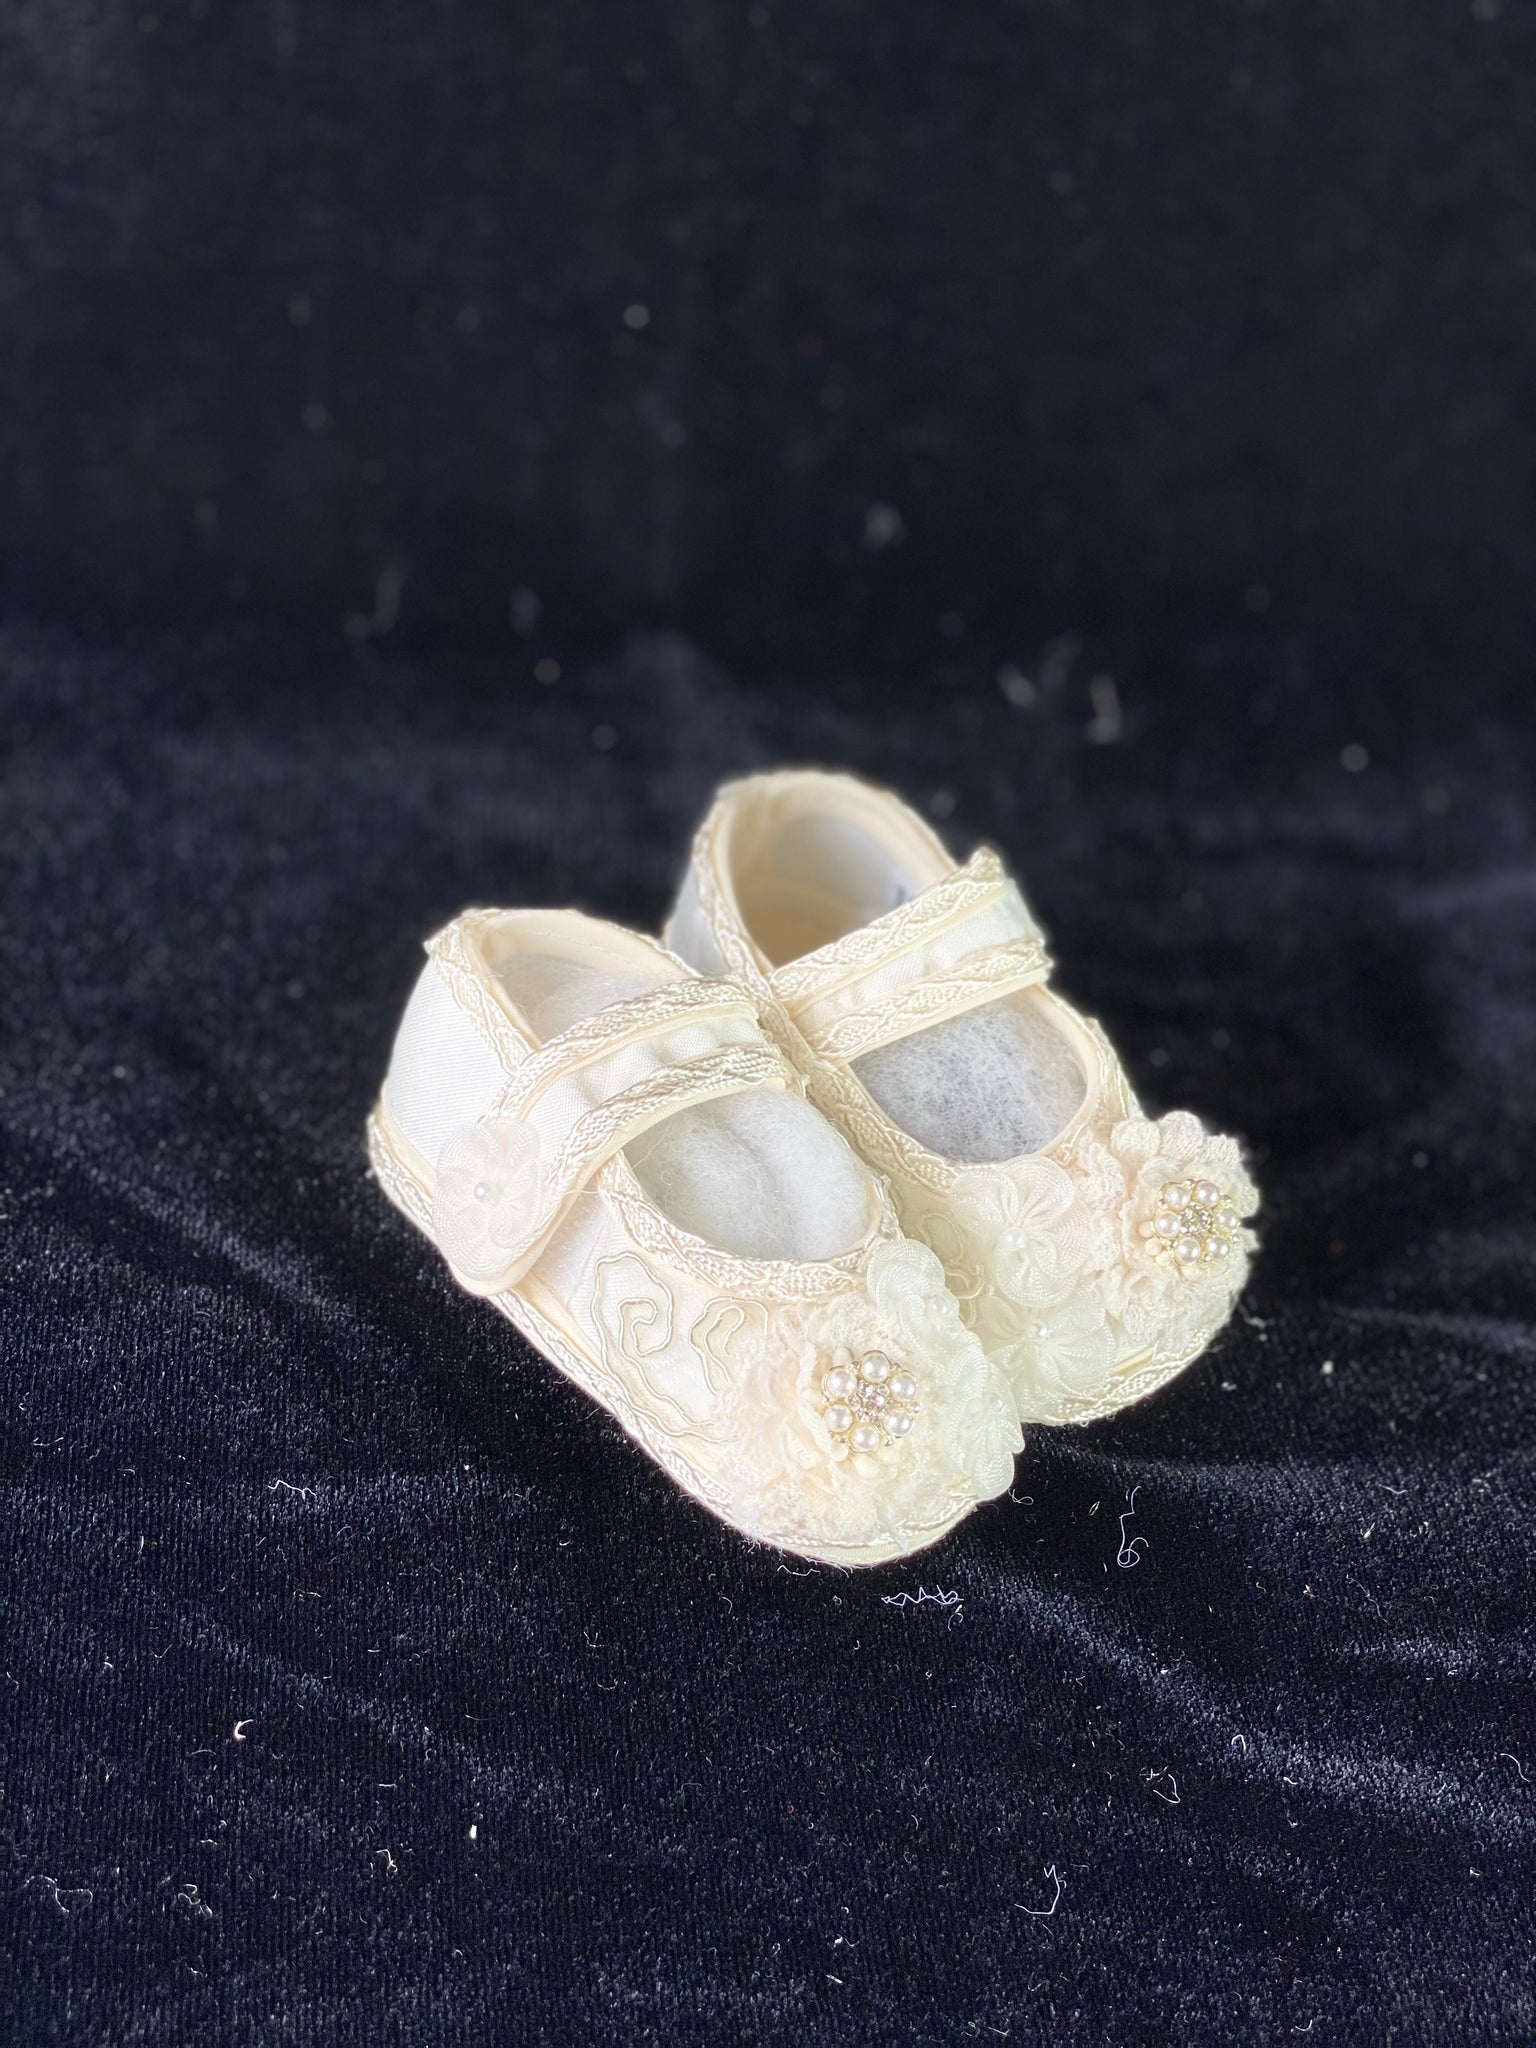 Elegant handmade white and ivory baby girl shoes with embroidery, lace, flowers, and jewels (pears and crystals).